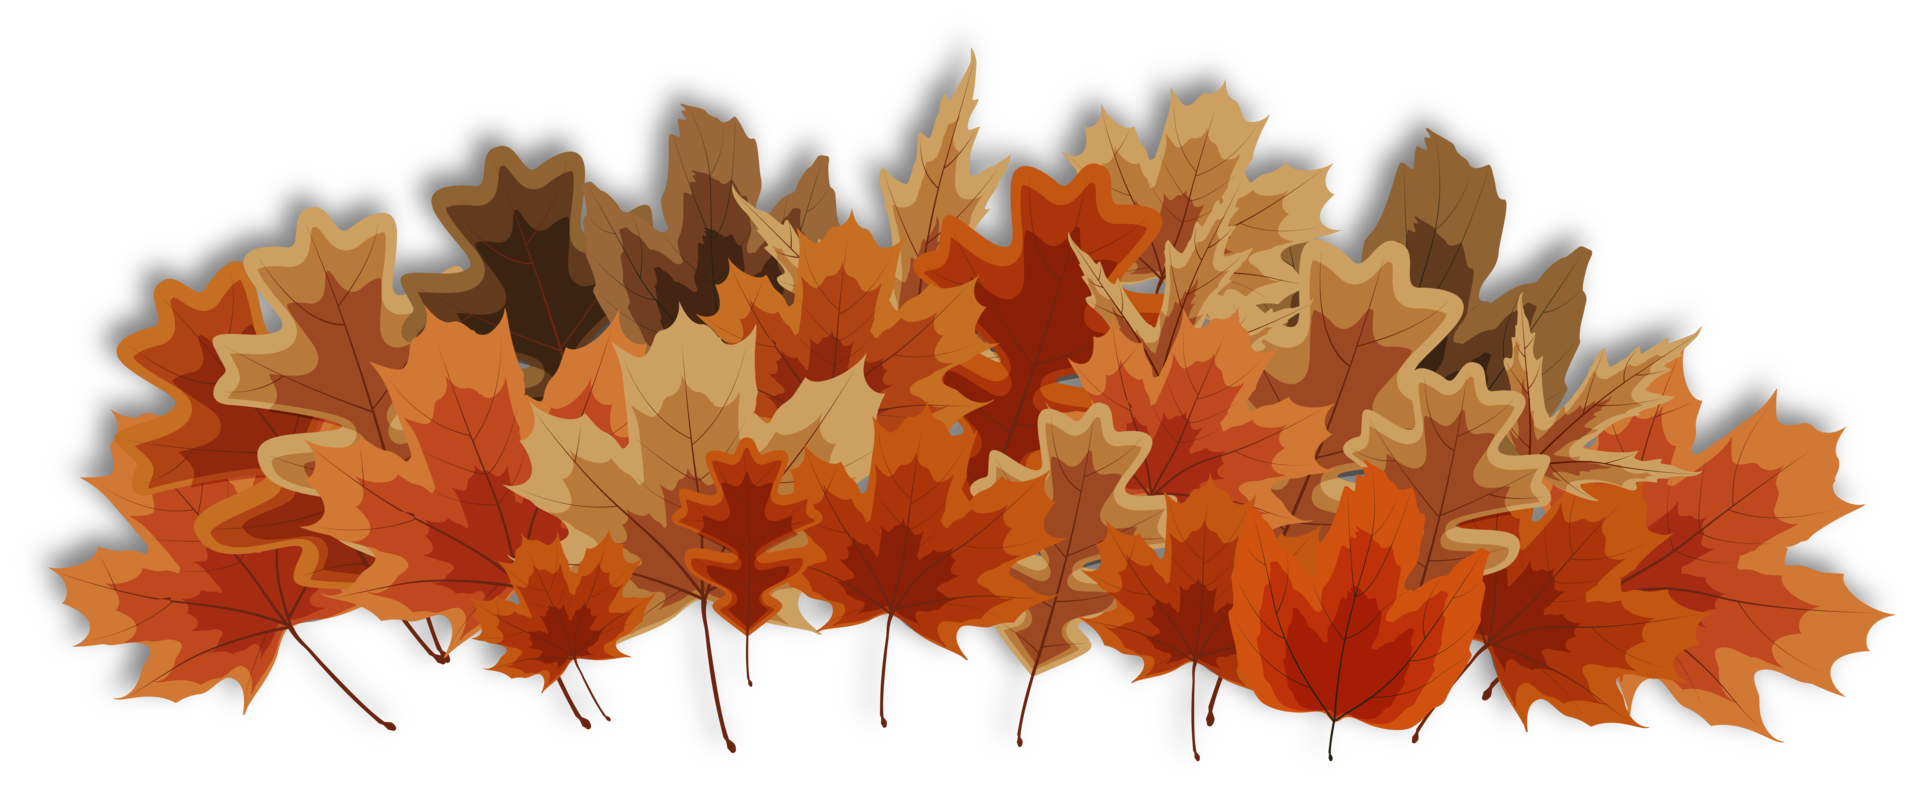 Autumn Dry Falling Leaves png